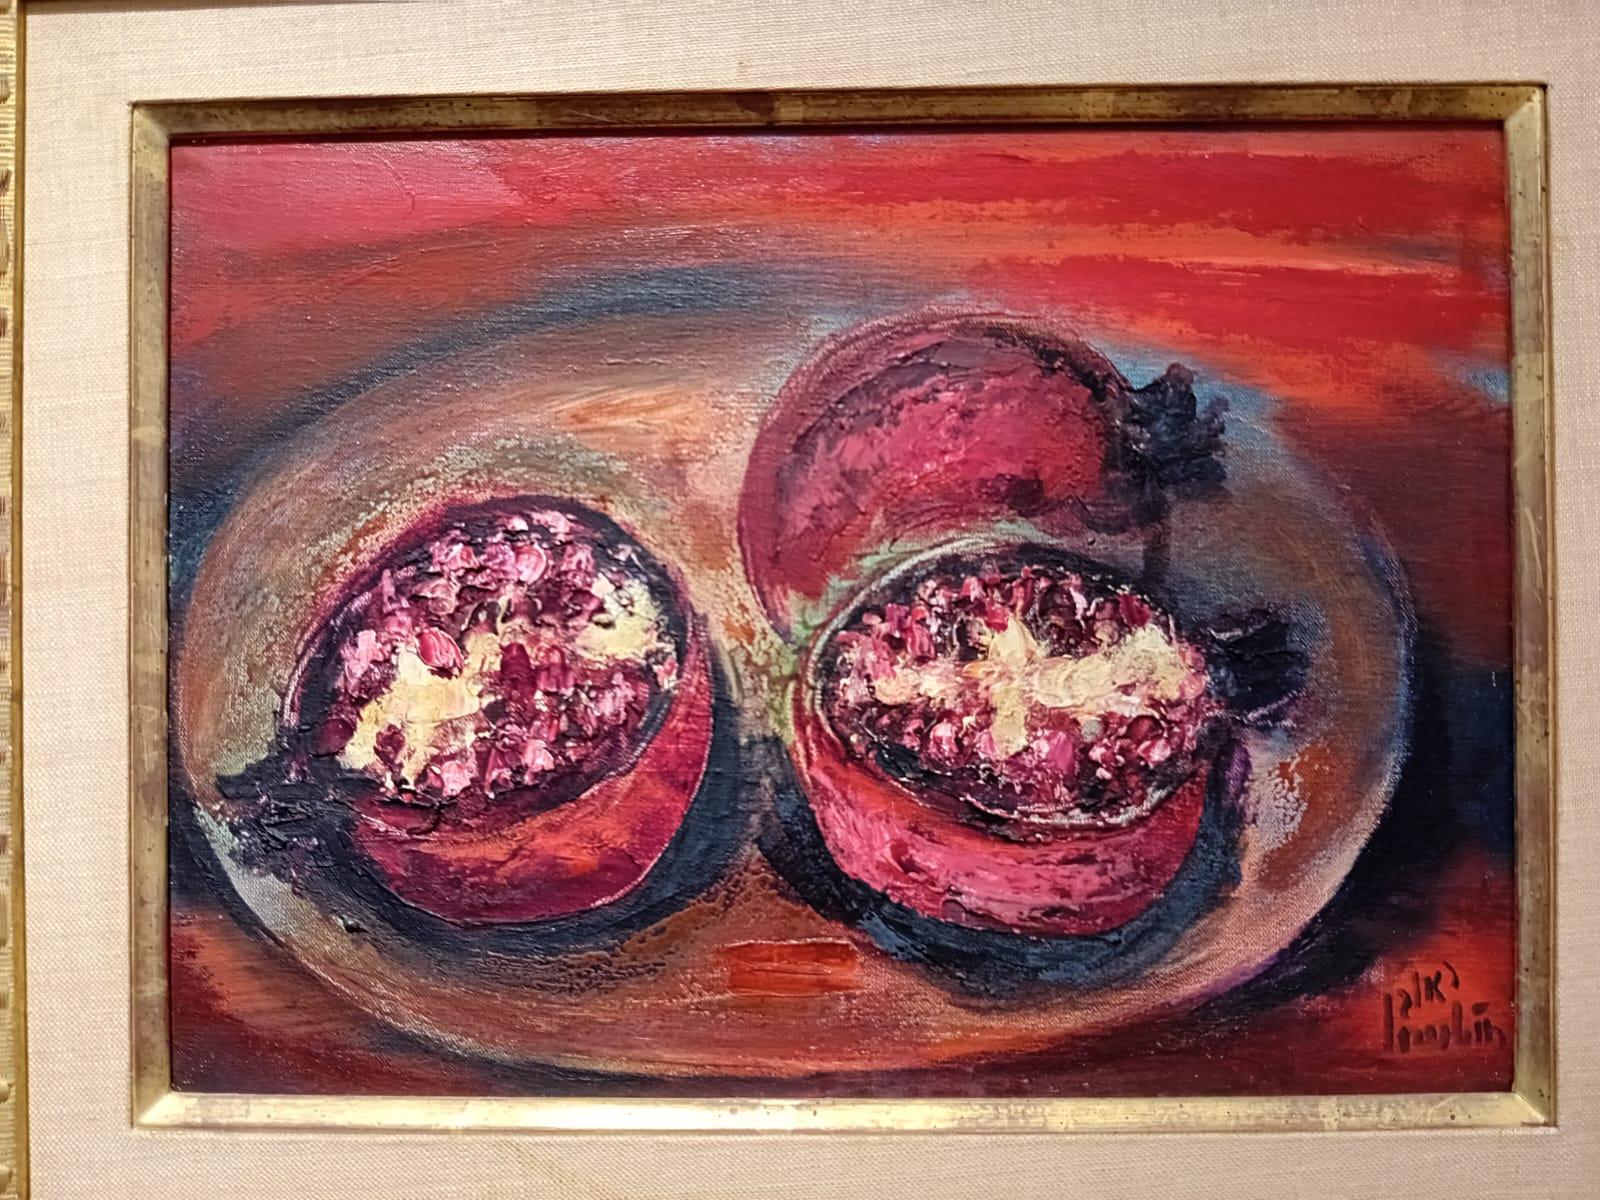 A wonderful still life piece of art by famous Israeli artist Reuven Rubin.
Signed to lower right.